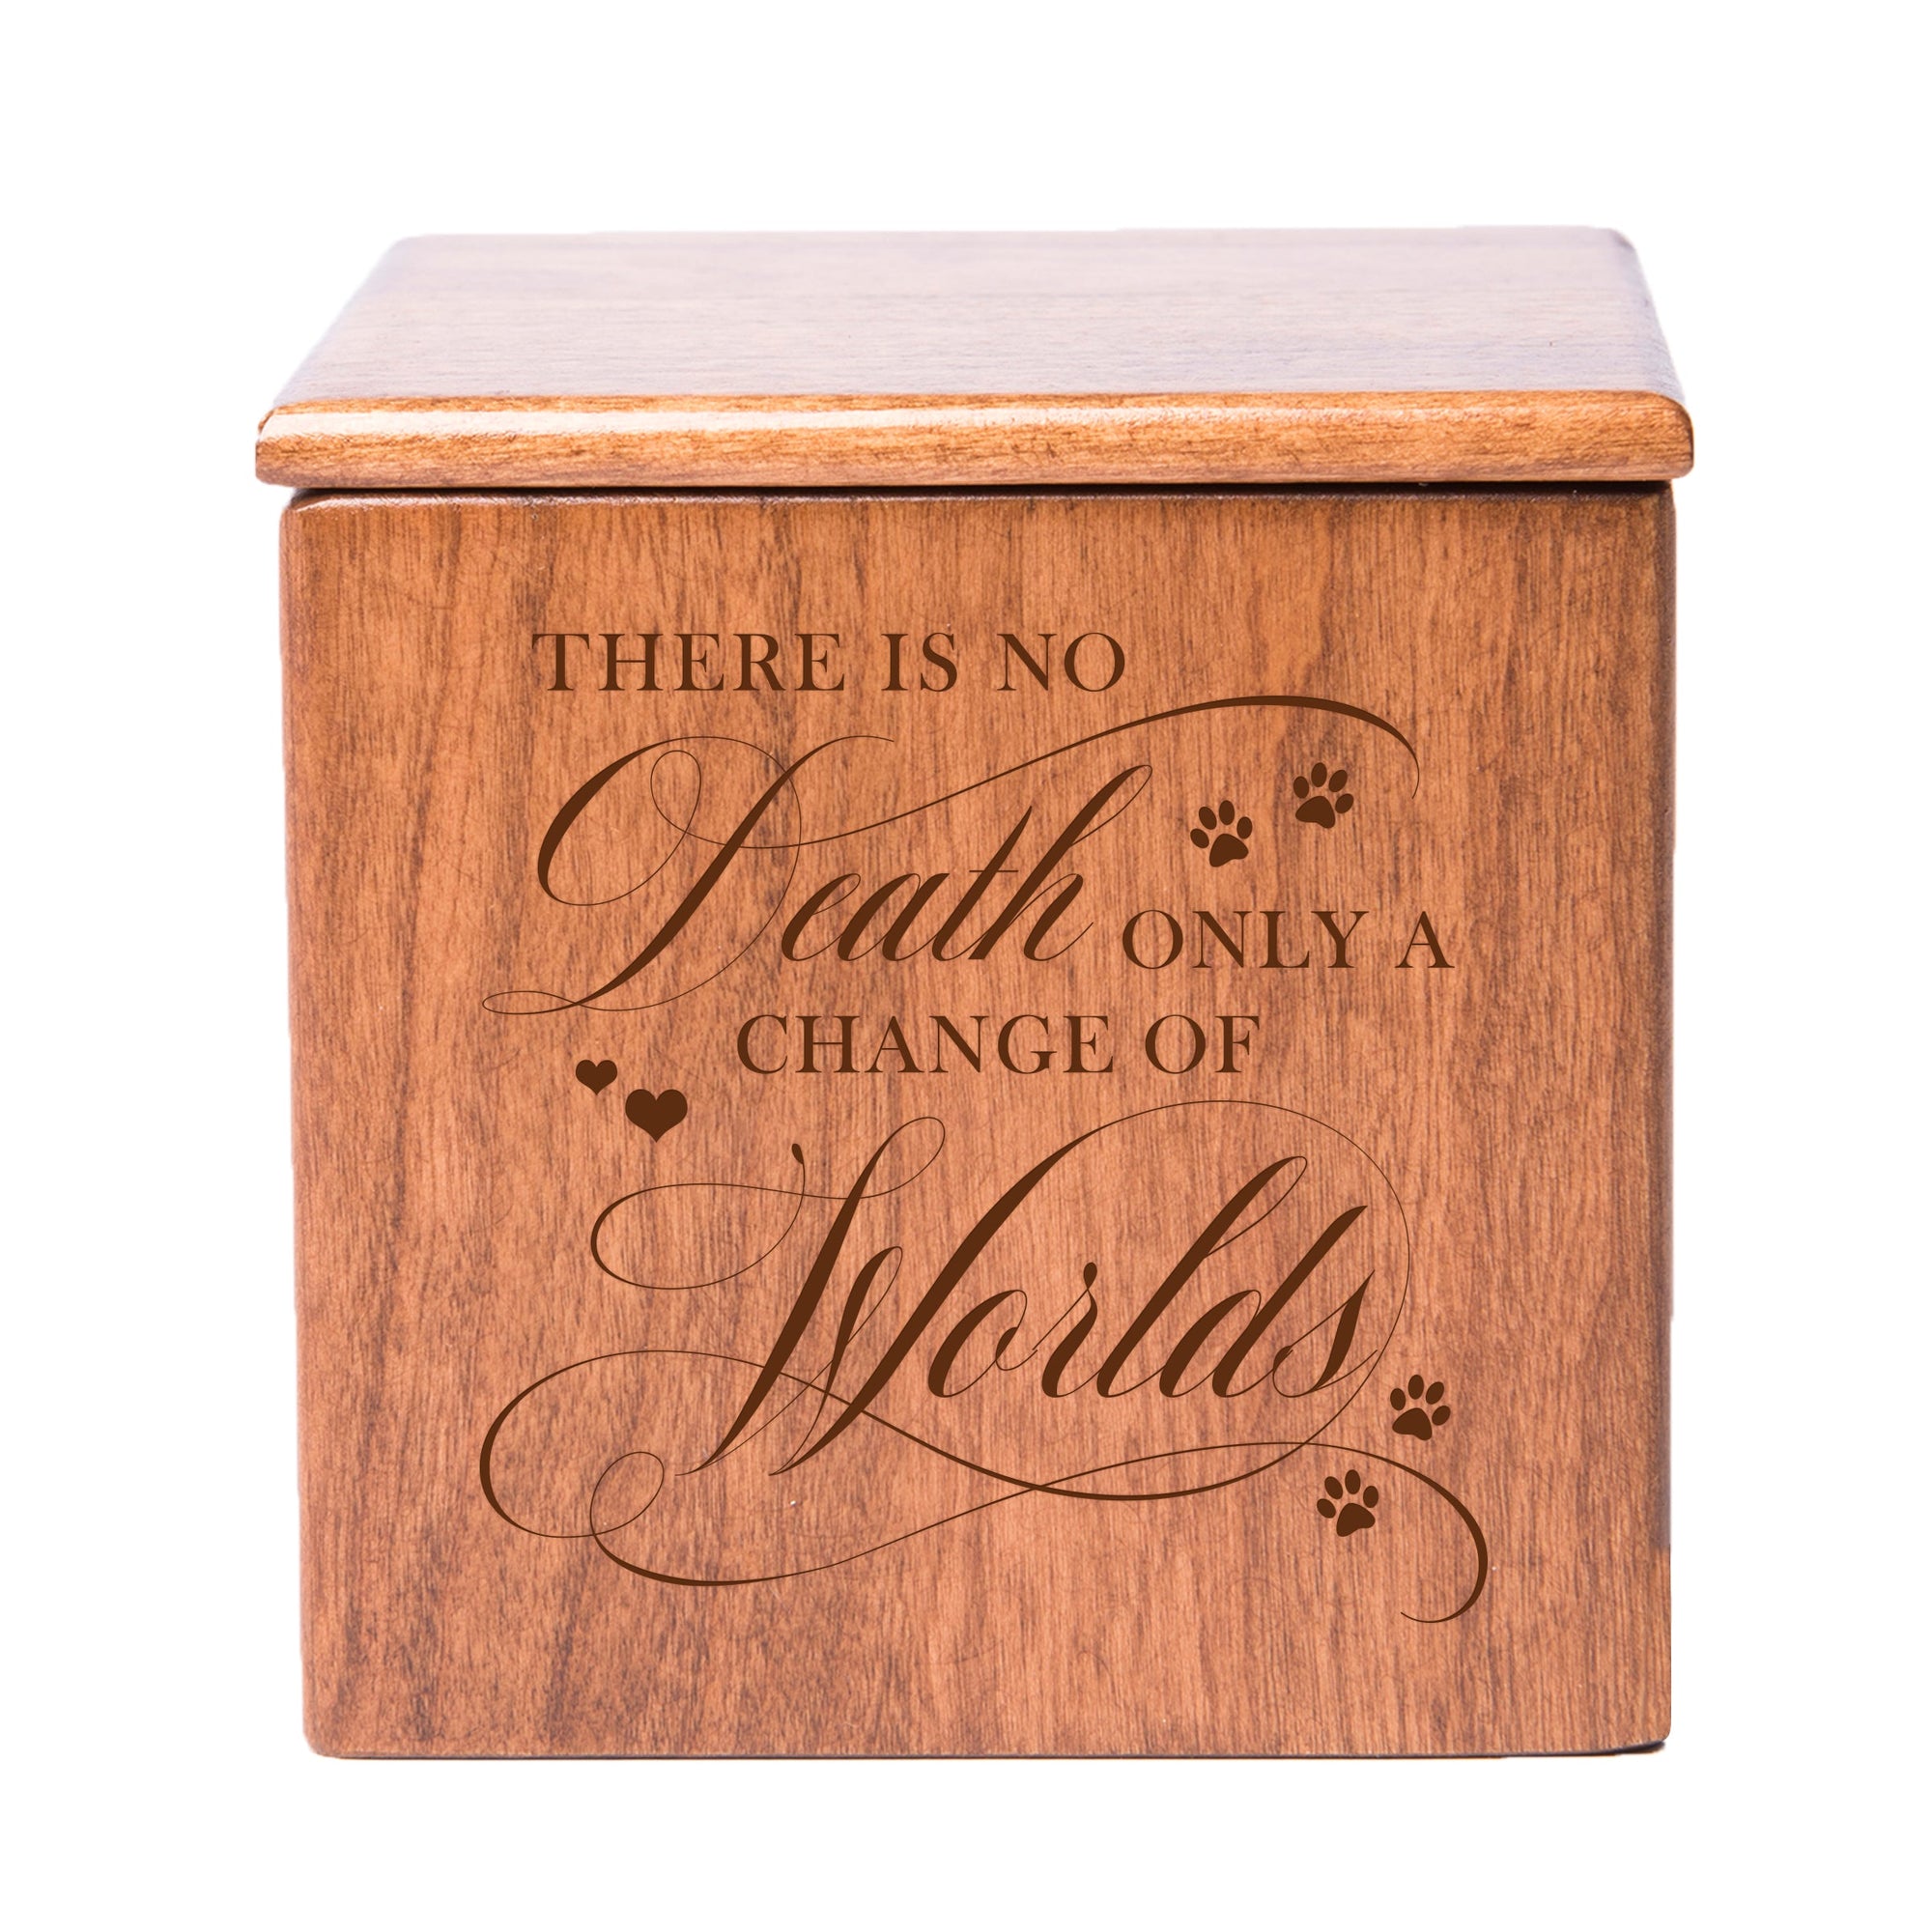 Pet Memorial Keepsake Cremation Urn Box for Dog or Cat - There Is No Death